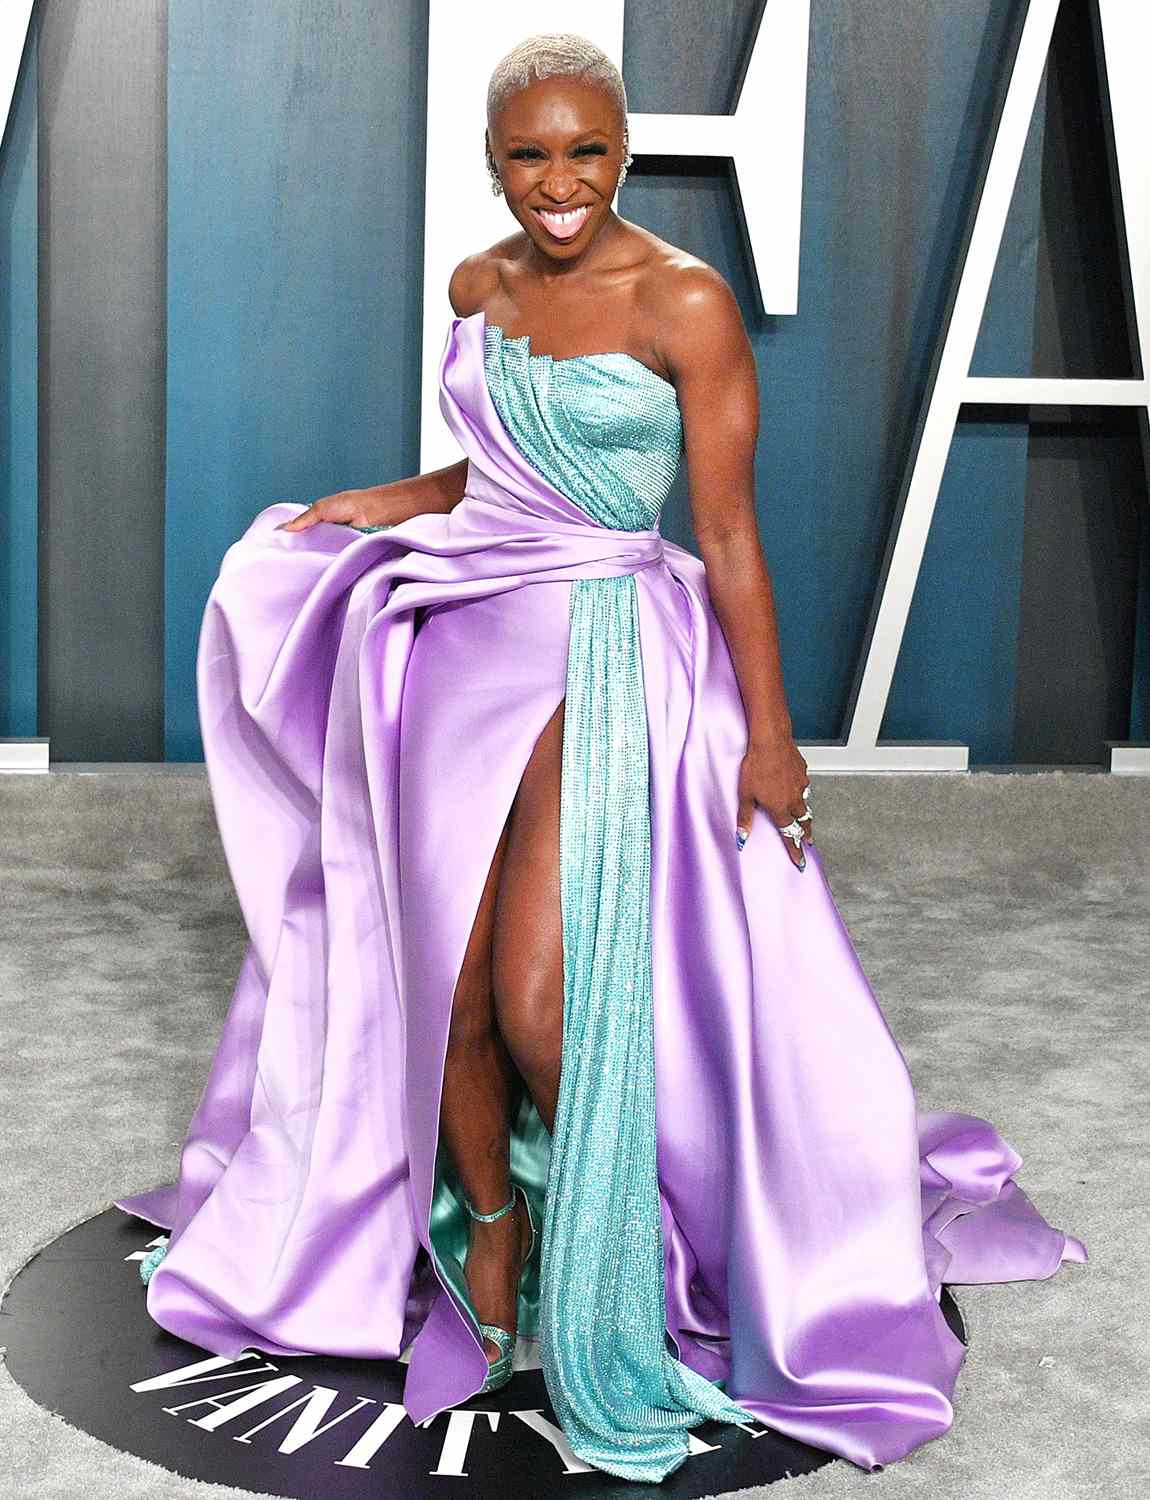 Cynthia Erivo attends the 2020 Vanity Fair Oscar party hosted by Radhika Jones at Wallis Annenberg Center for the Performing Arts on February 09, 2020 in Beverly Hills, California